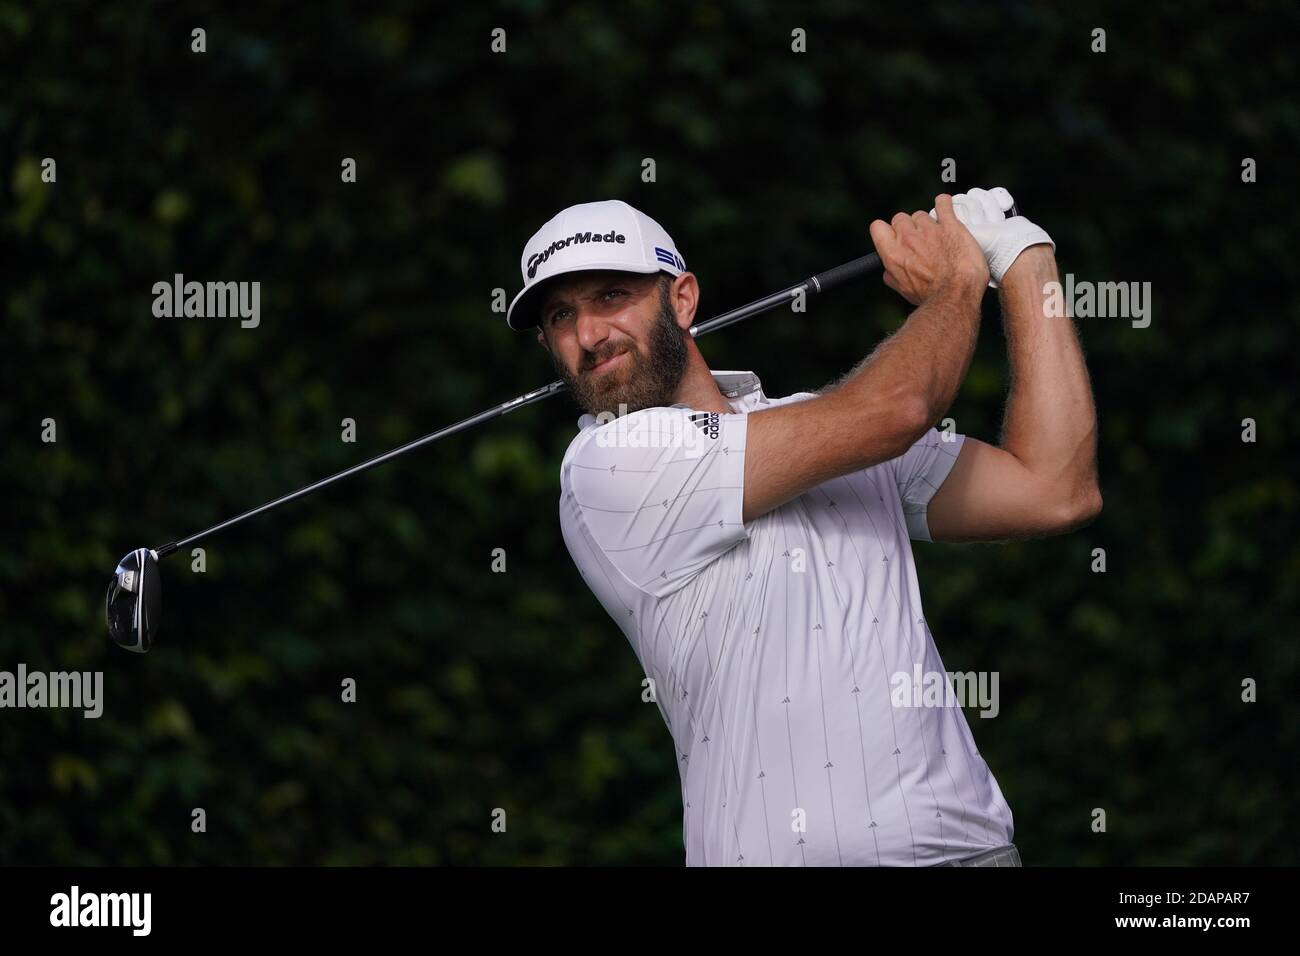 Augusta, United States. 14th Nov, 2020. Dustin Johnson watches his drive off the second tee during the third round of the 2020 Masters golf tournament at Augusta National Golf Club in Augusta, Georgia on Saturday, November 14, 2020. Photo by Kevin Dietsch/UPI Credit: UPI/Alamy Live News Stock Photo